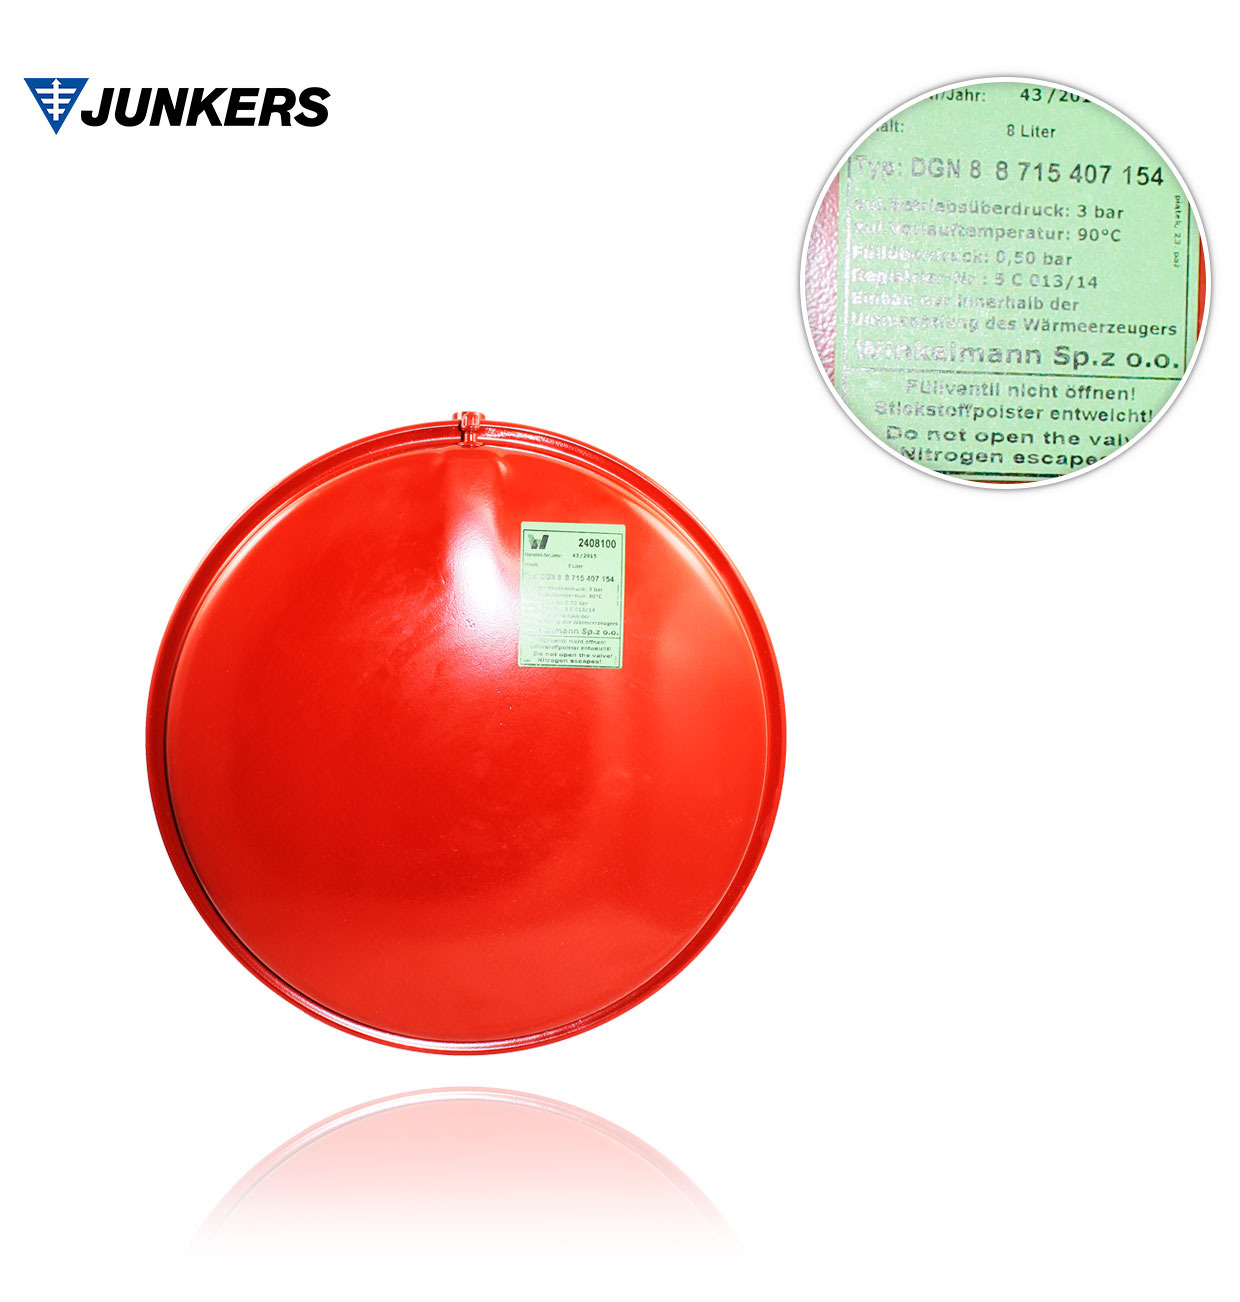 8l. ZW23 AE23/ ZW20/ ZW24AE23/ ZWR24-2ADE23 JUNKERS EXPANSION VESSEL